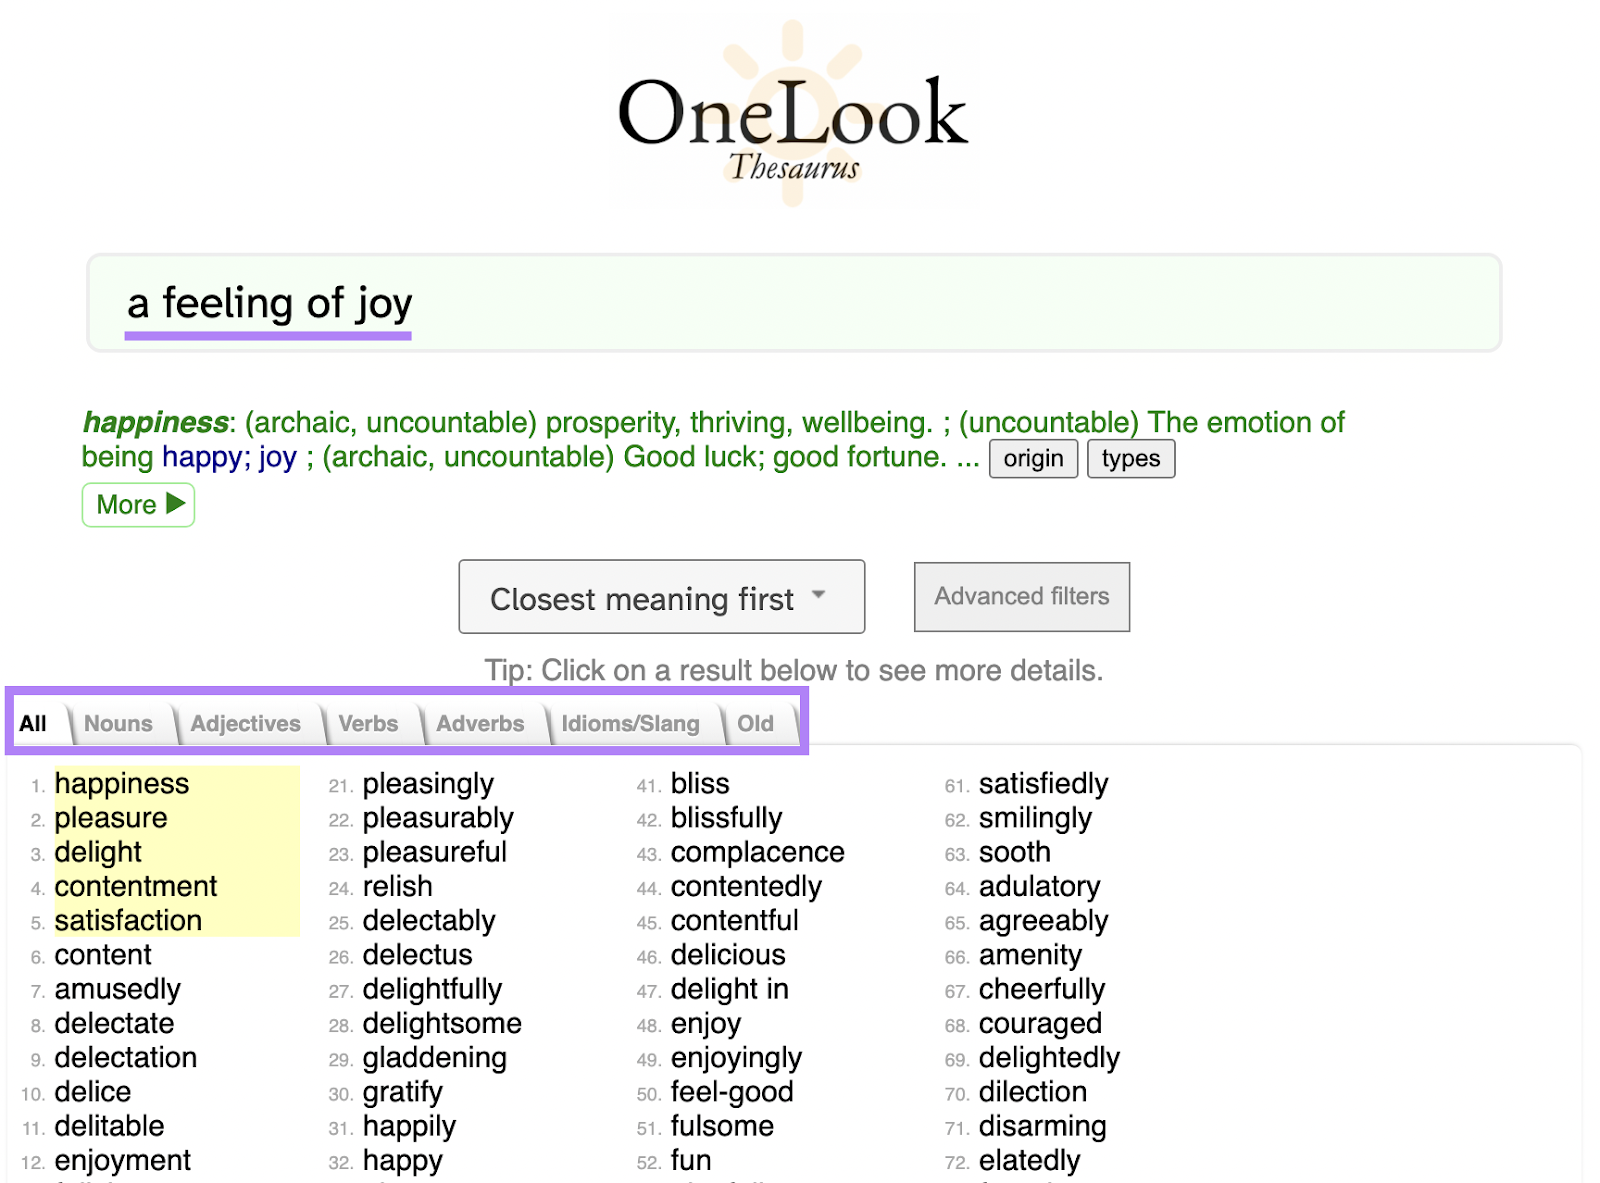 searching for "a feeling of joy" in OneLook Thesaurus